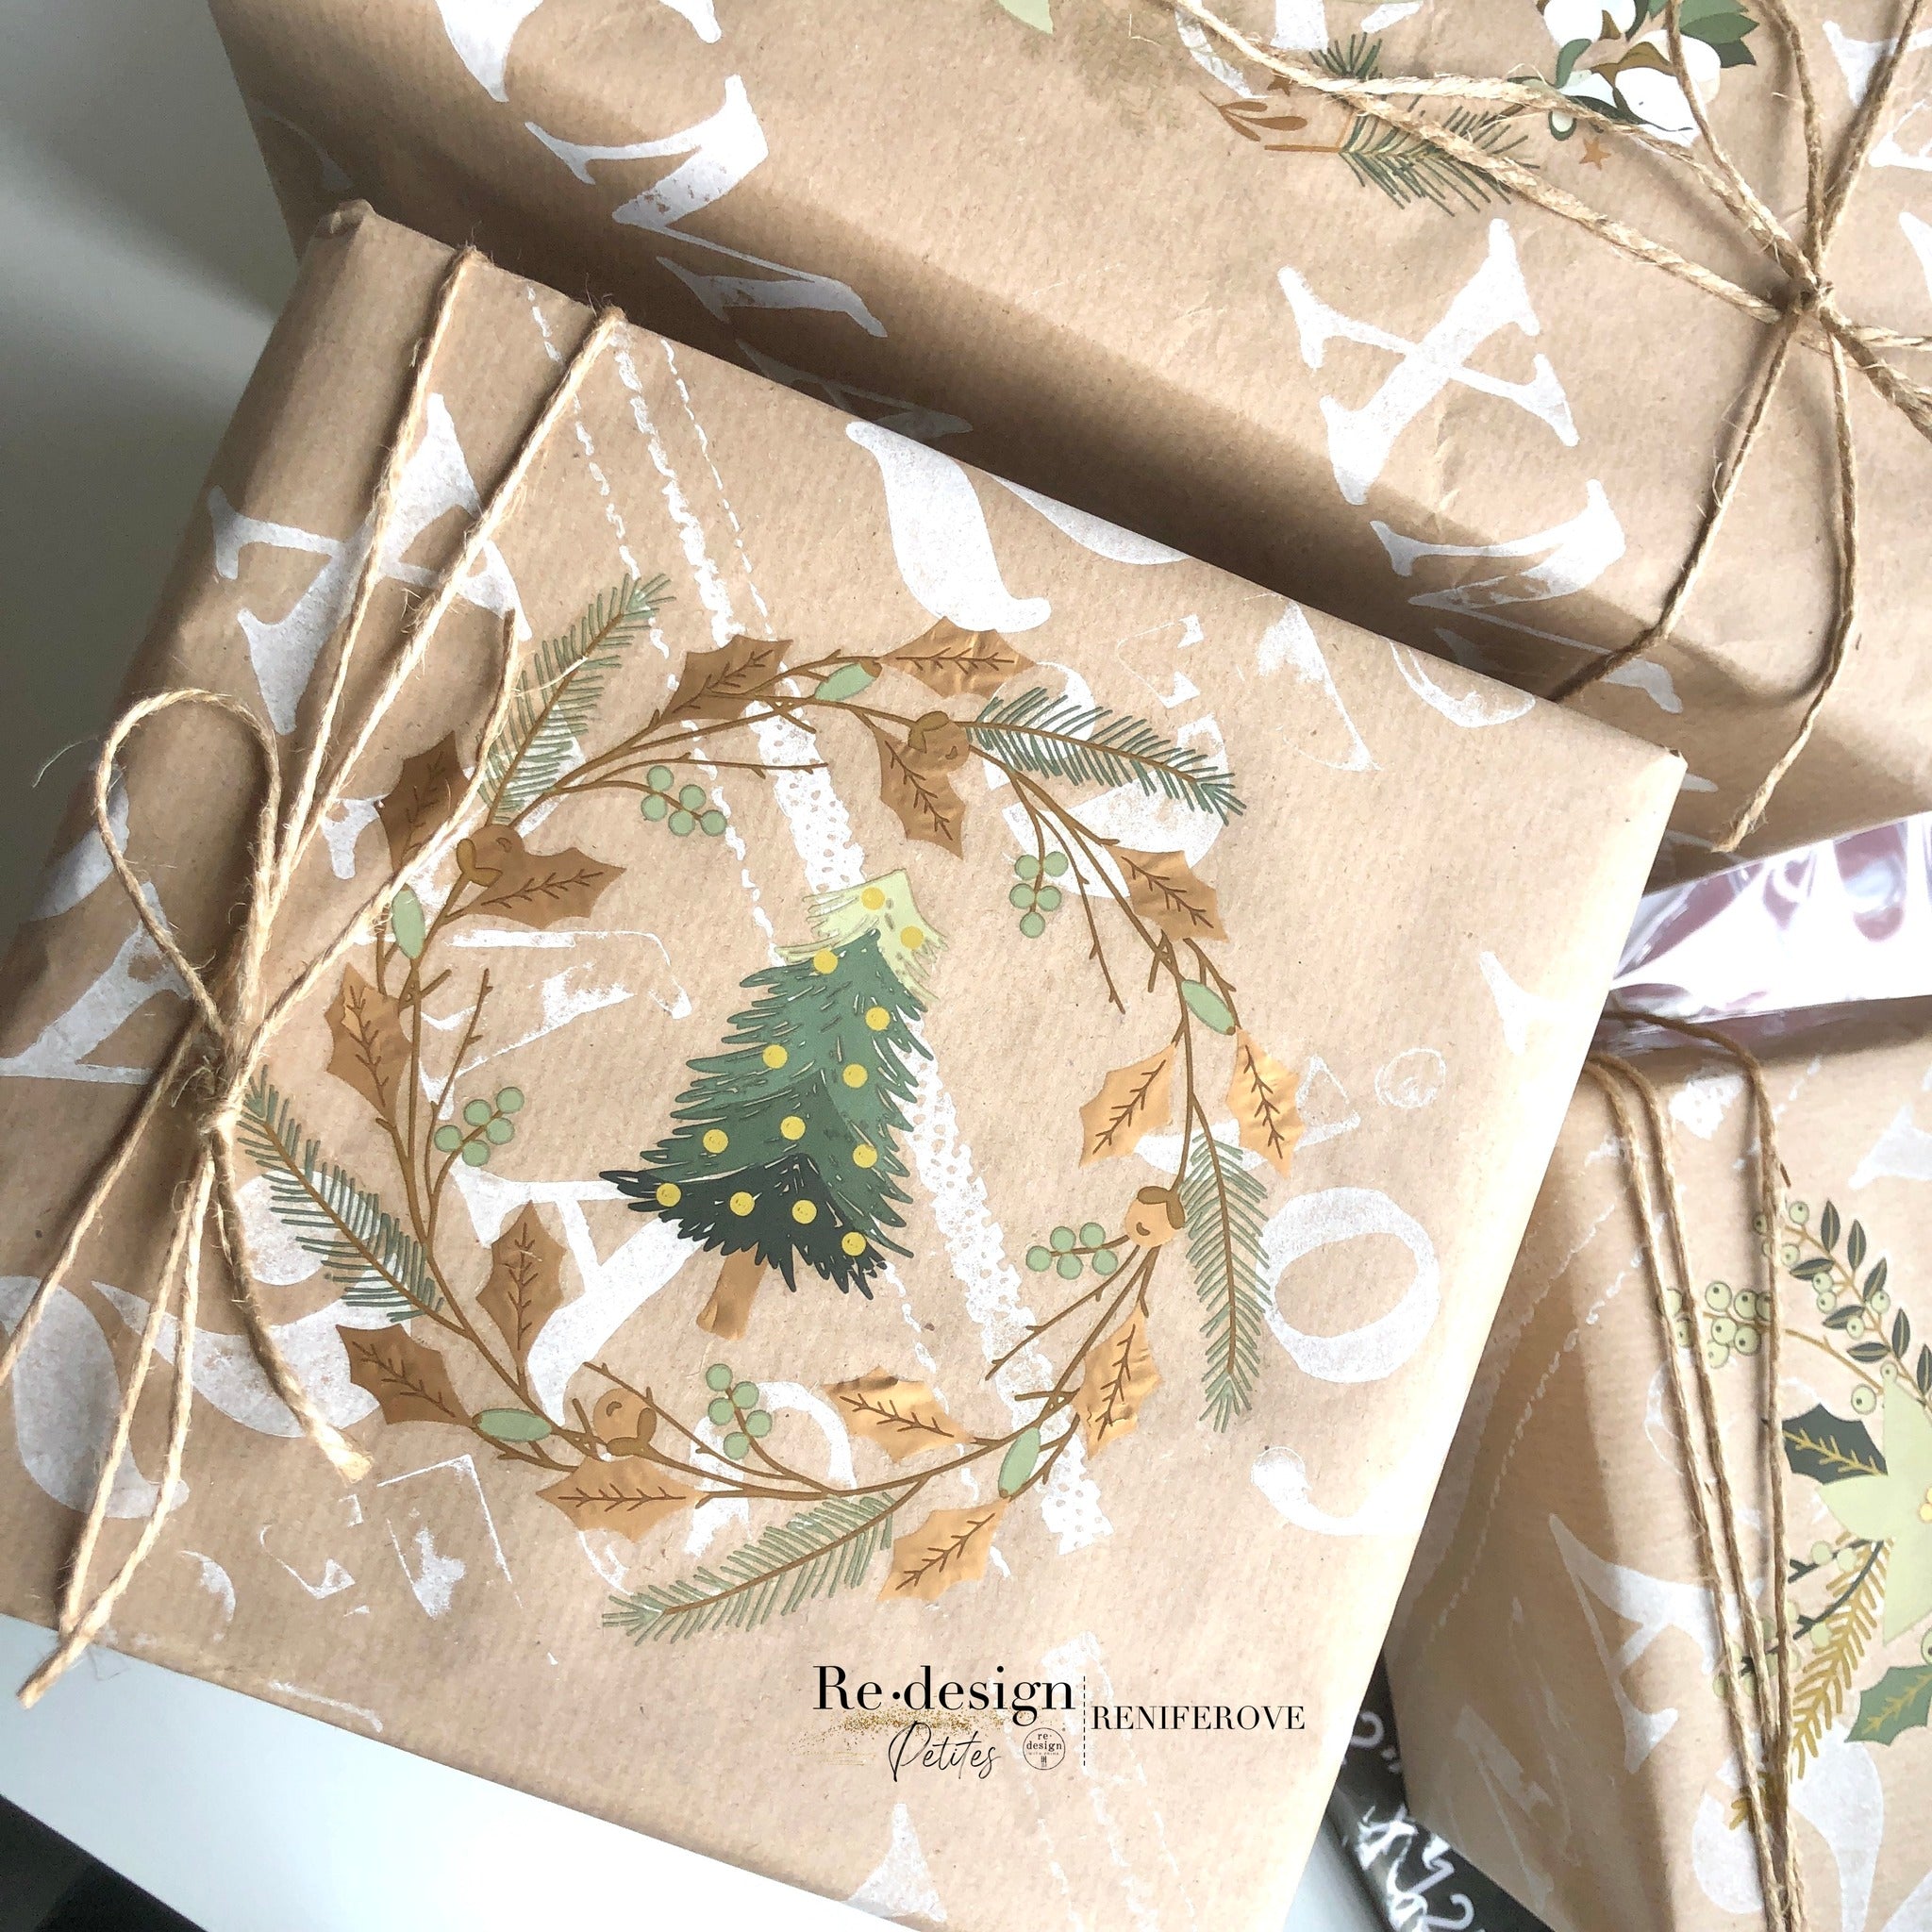 Brown paper wrapped gifts created by Reniferove features ReDesign with Prima's Holiday Spirit small transfers on them.